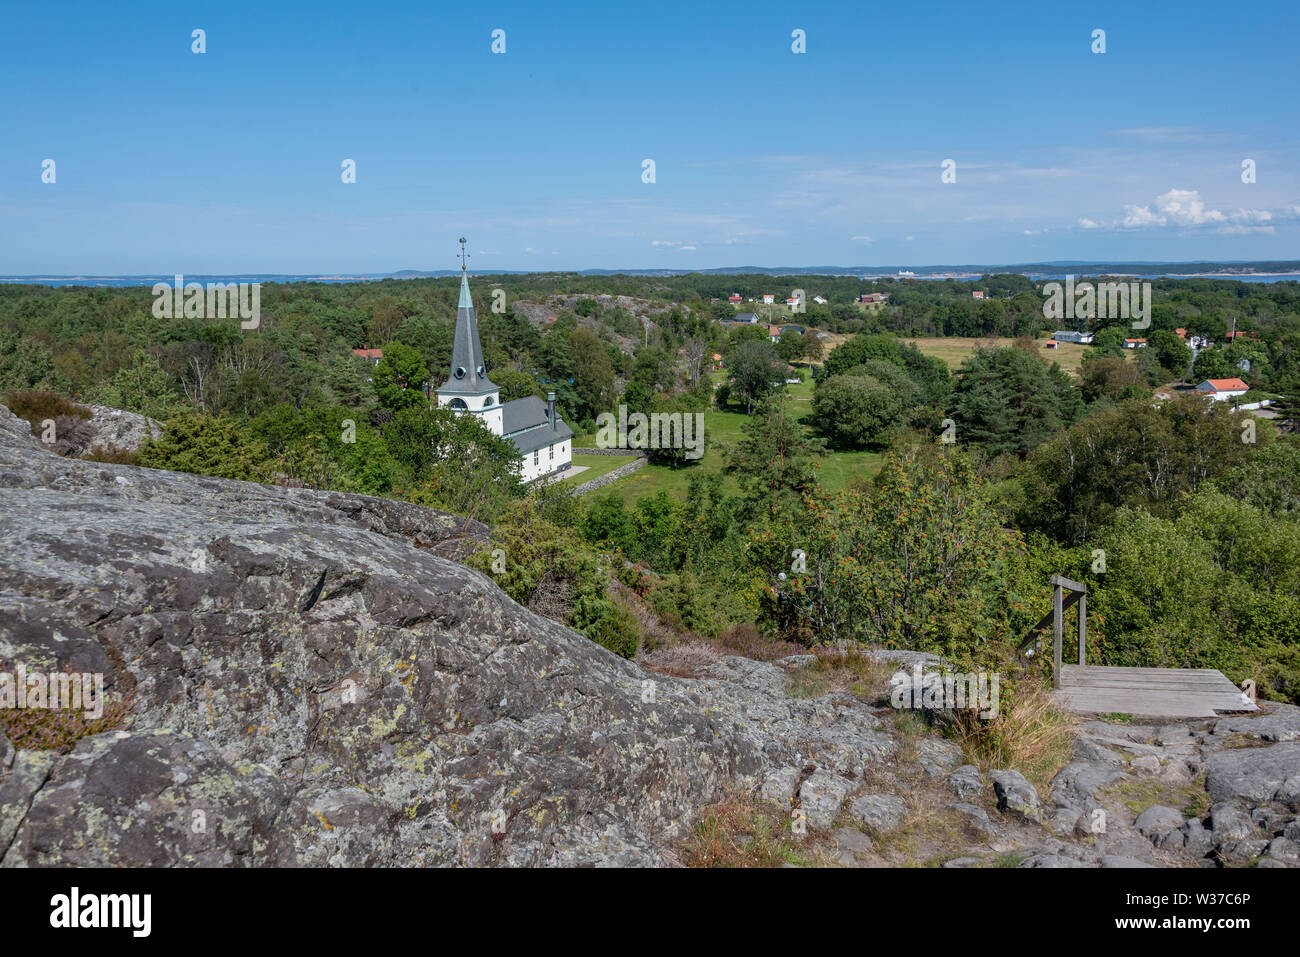 Koster, Sweden - July 12, 2019: View of the church of Koster in the National Park Kosterhavet in Sweden, west coast. Stock Photo